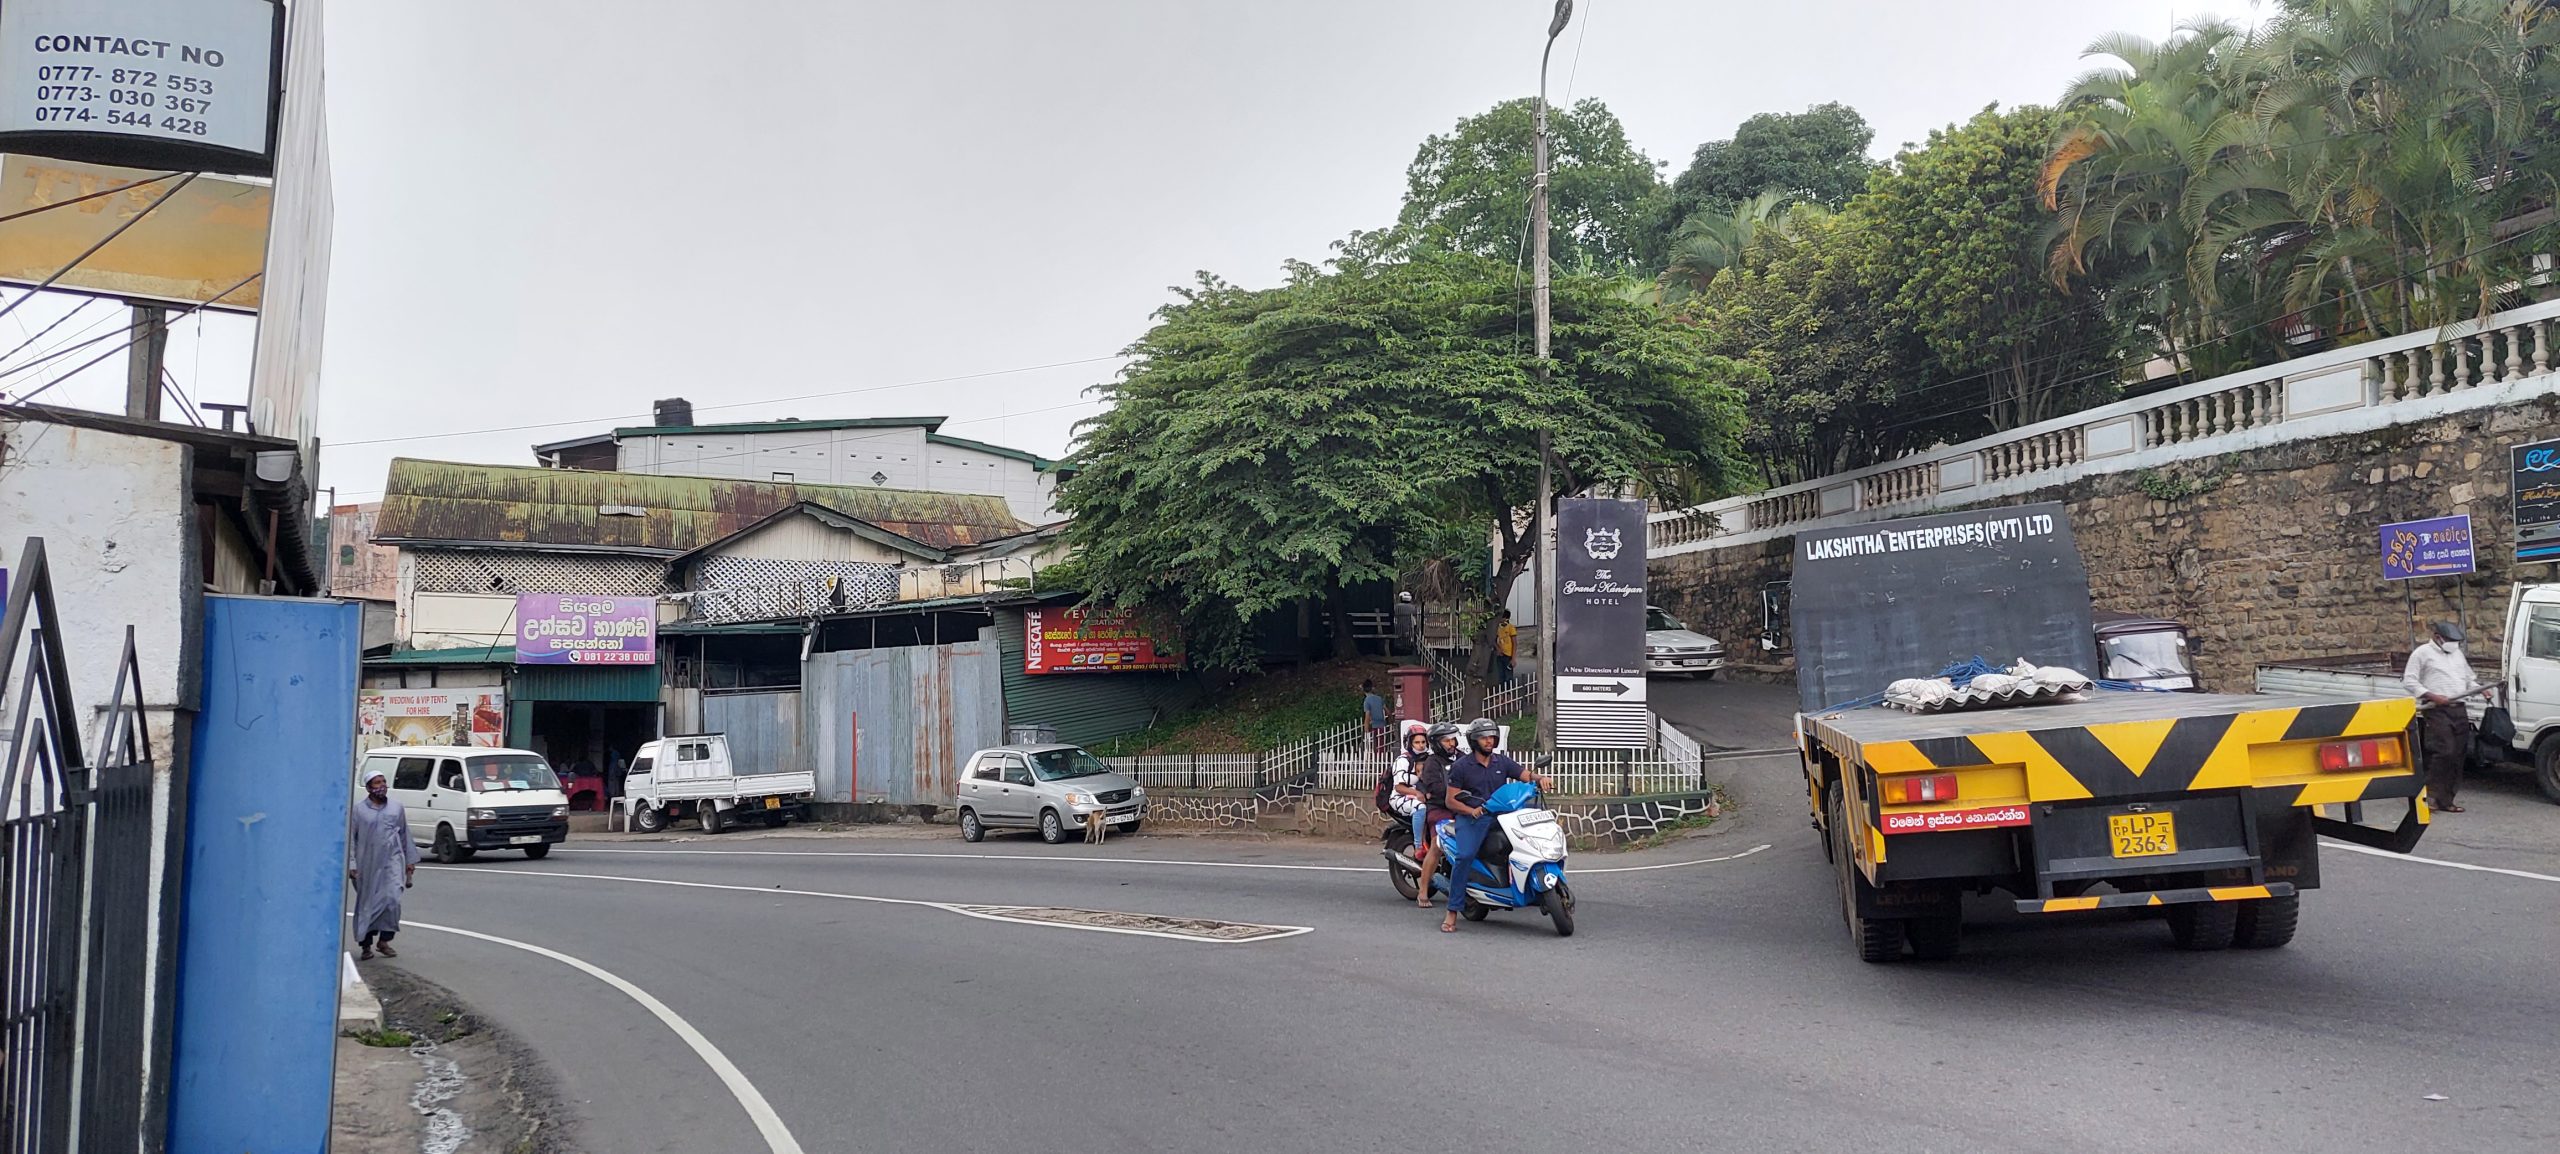 Commercial Land for sale in Kandy city